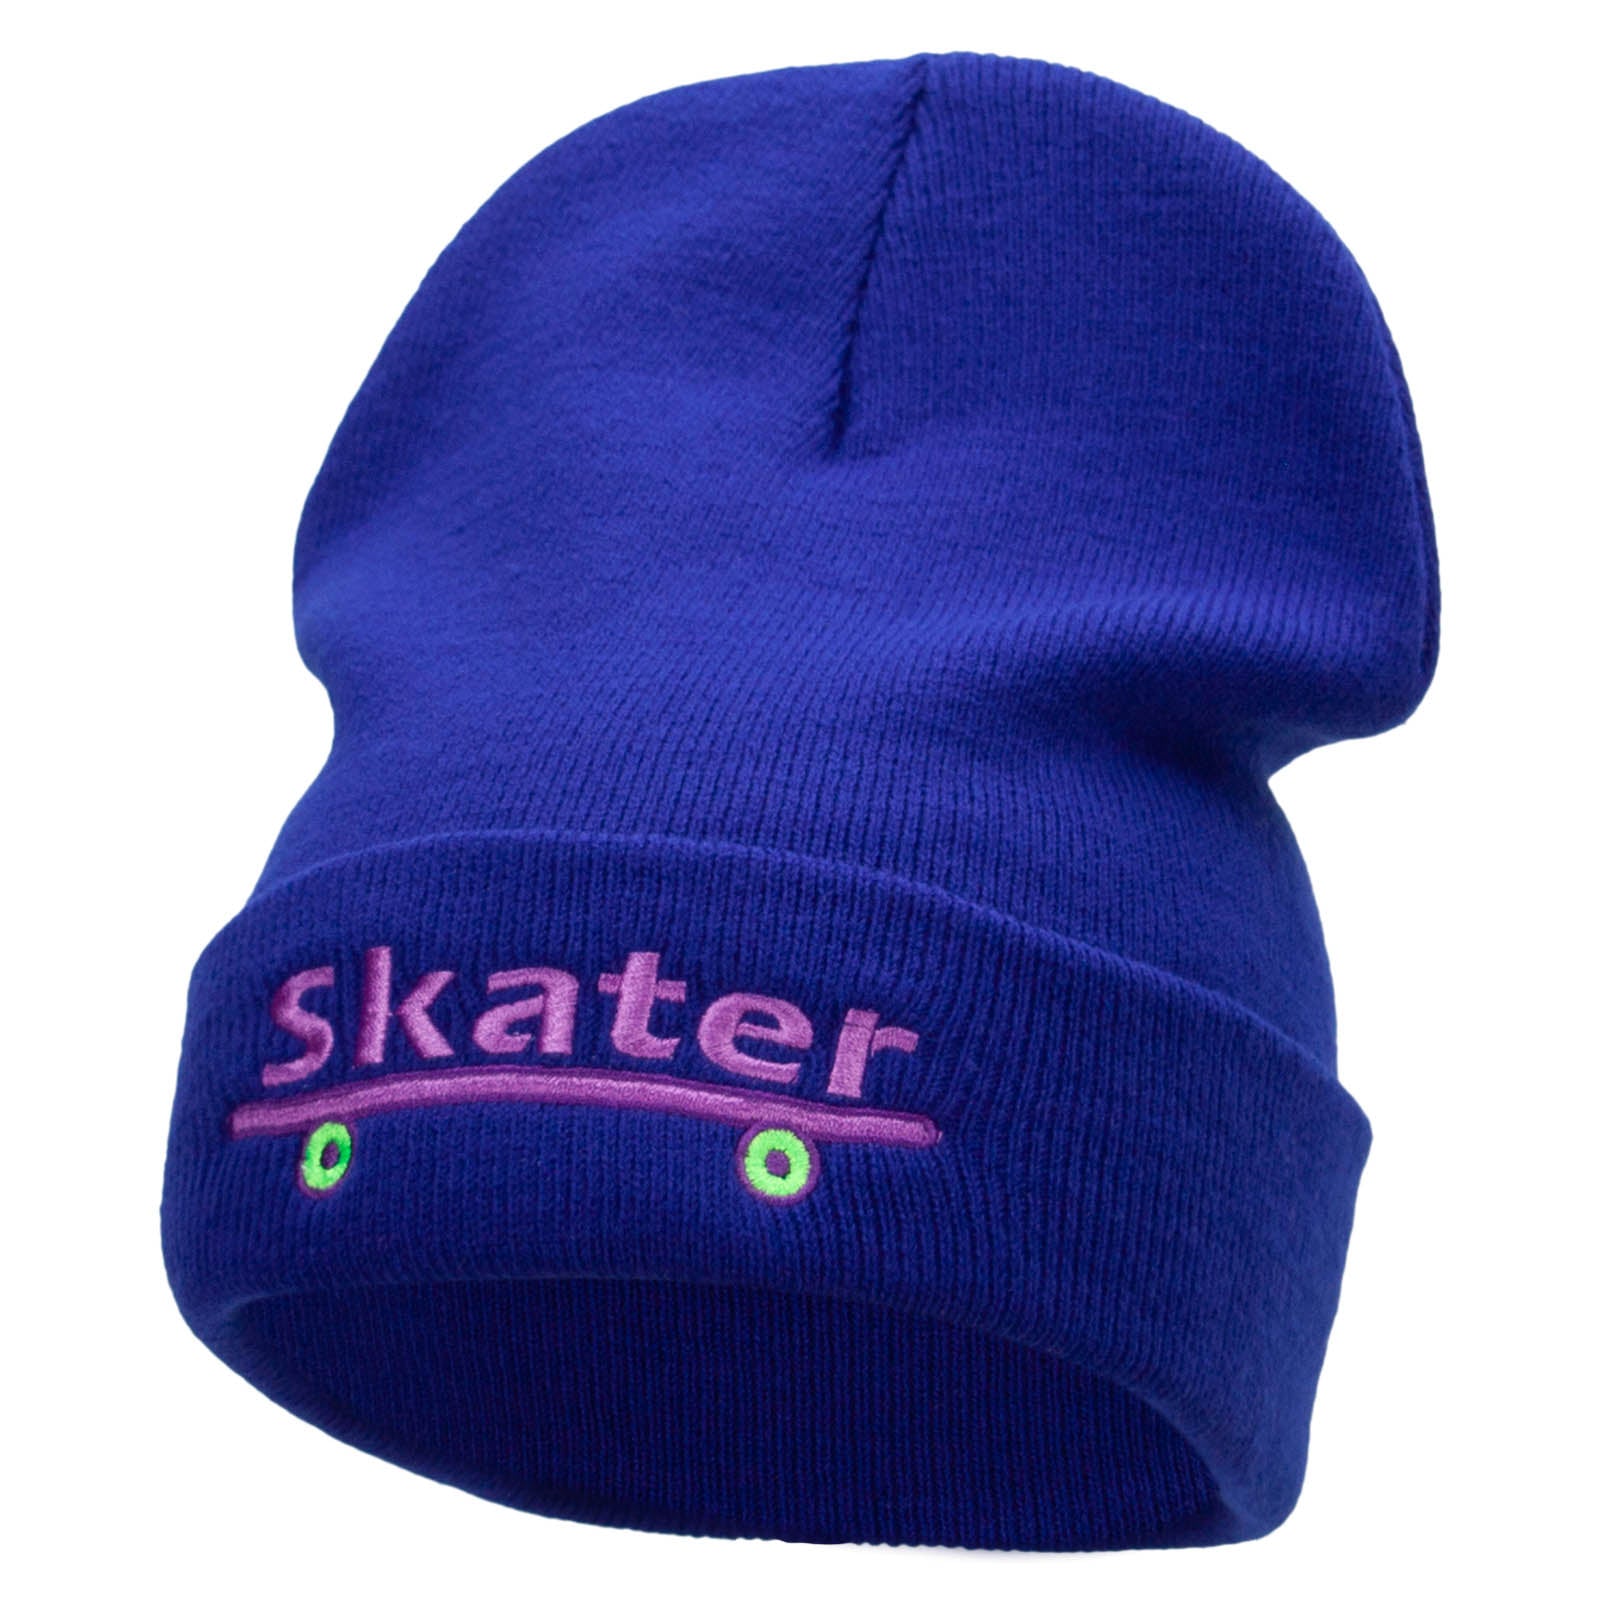 Skater Embroidered 12 Inch Long Knitted Beanie - Royal OSFM